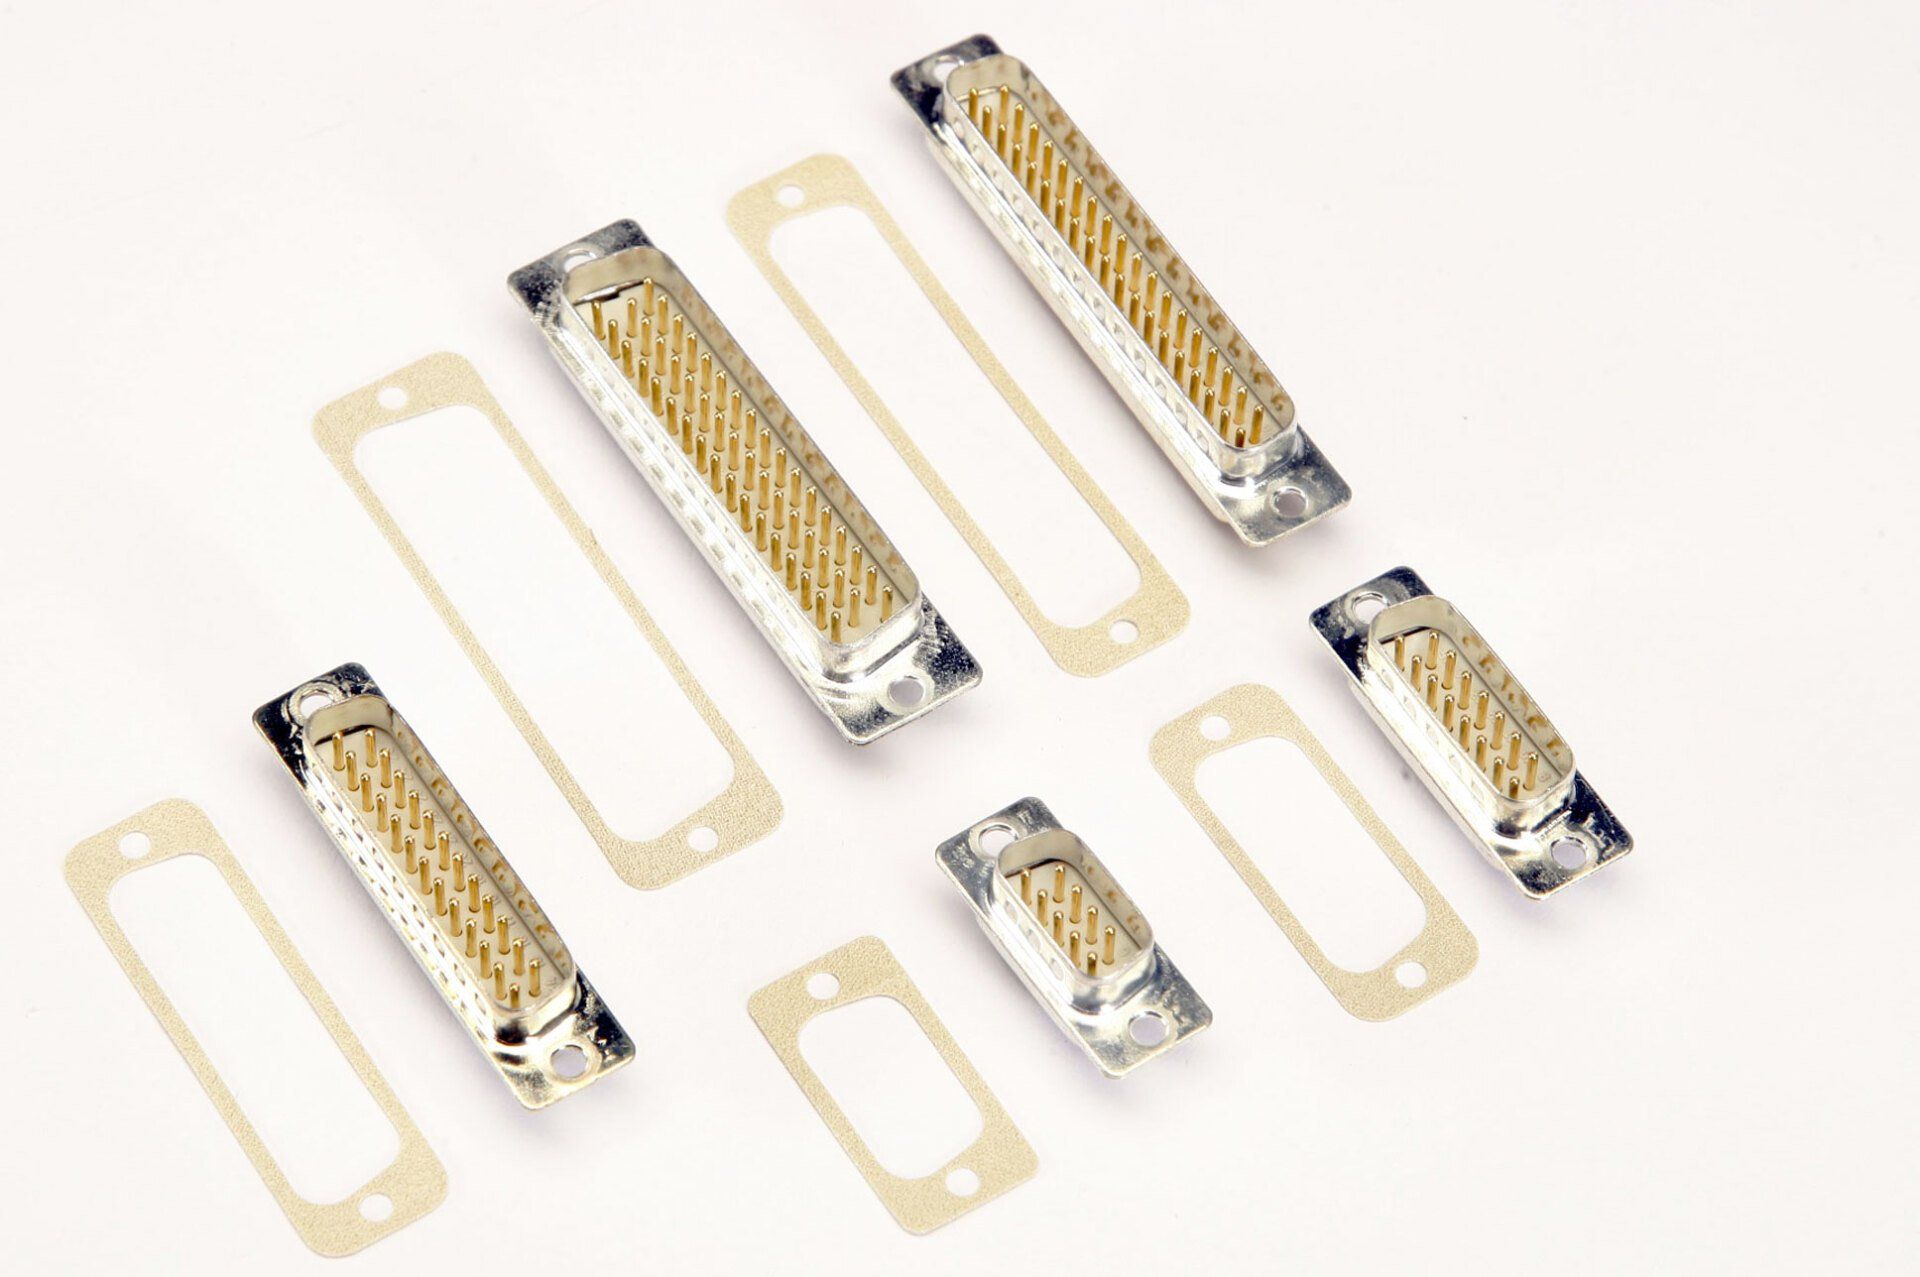 Flat gaskets,  Sub ‘d’ connectors,  Backshell connectors,  Custom gaskets,  TC Shielding,  TCS,  Conductive elastomer specialists,  Herefordshire,  conductive silicone manufacturers,